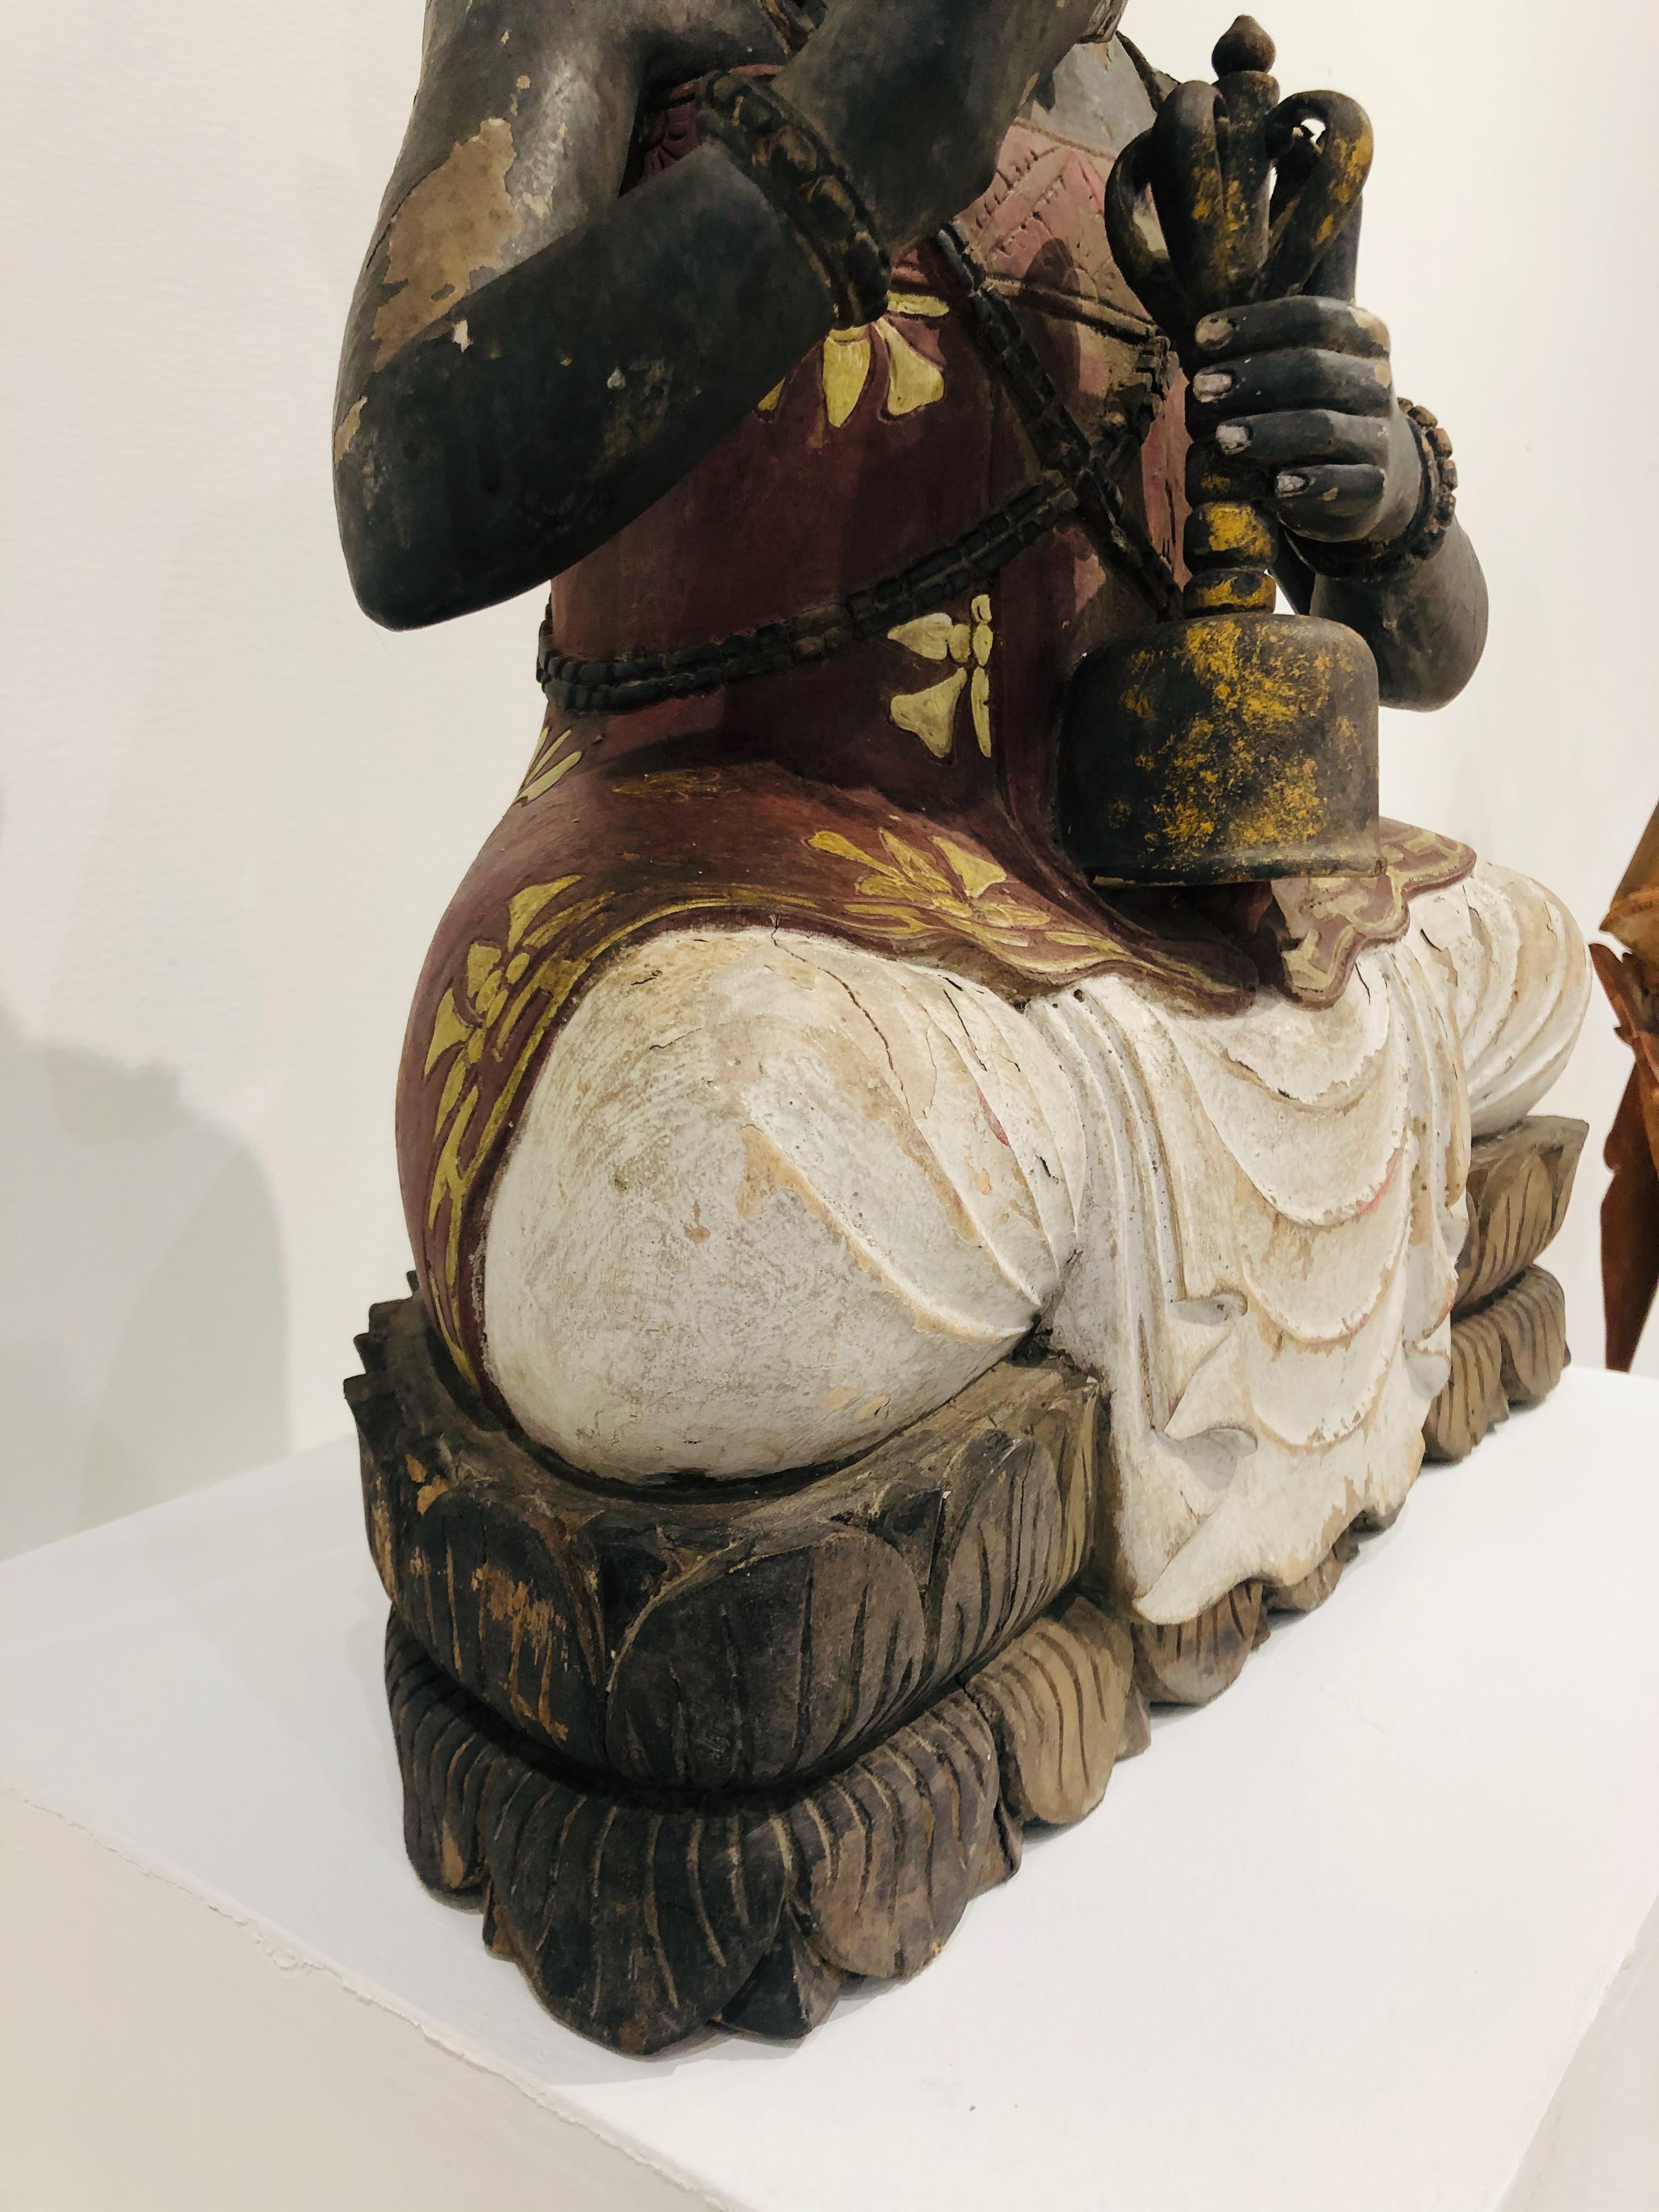 Buddhist High Priest in sitting position on lotus flower, 
 Polychrome Wood Sculpture 
 Rare early 19th-Century Balinese wood sculpture of the Buddhist High Priest holding flower and prayer bell. Hand carved Jackfruit wood with original polychrome